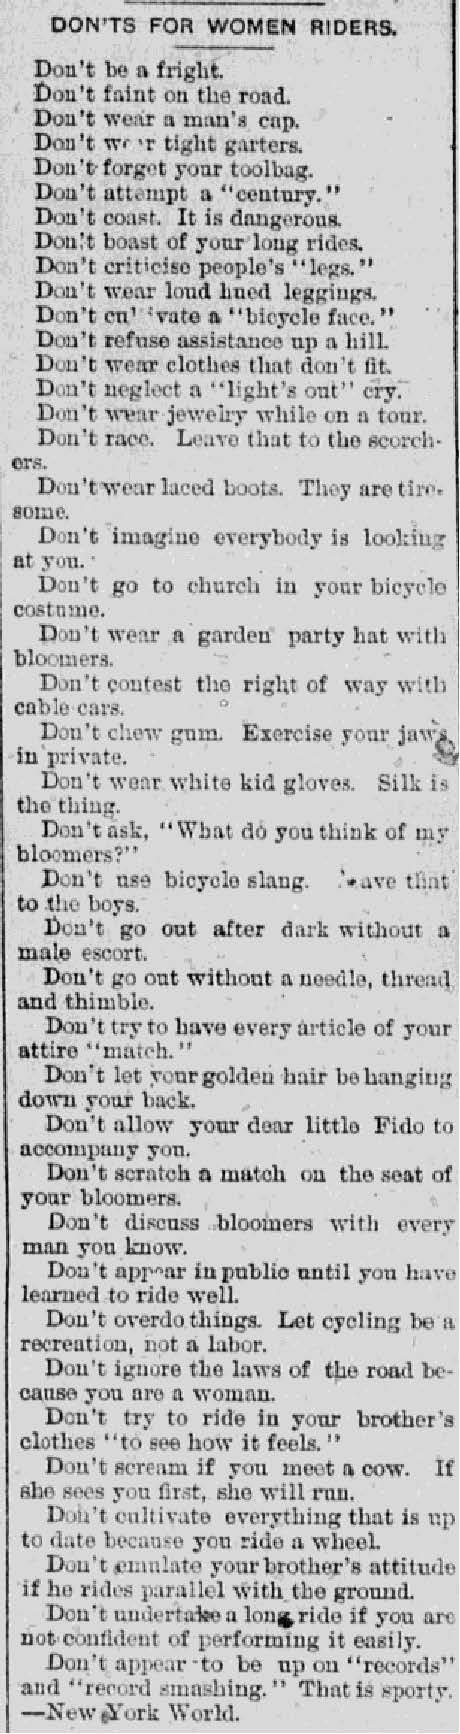 The Knoxville Journal, July 19, 1895.